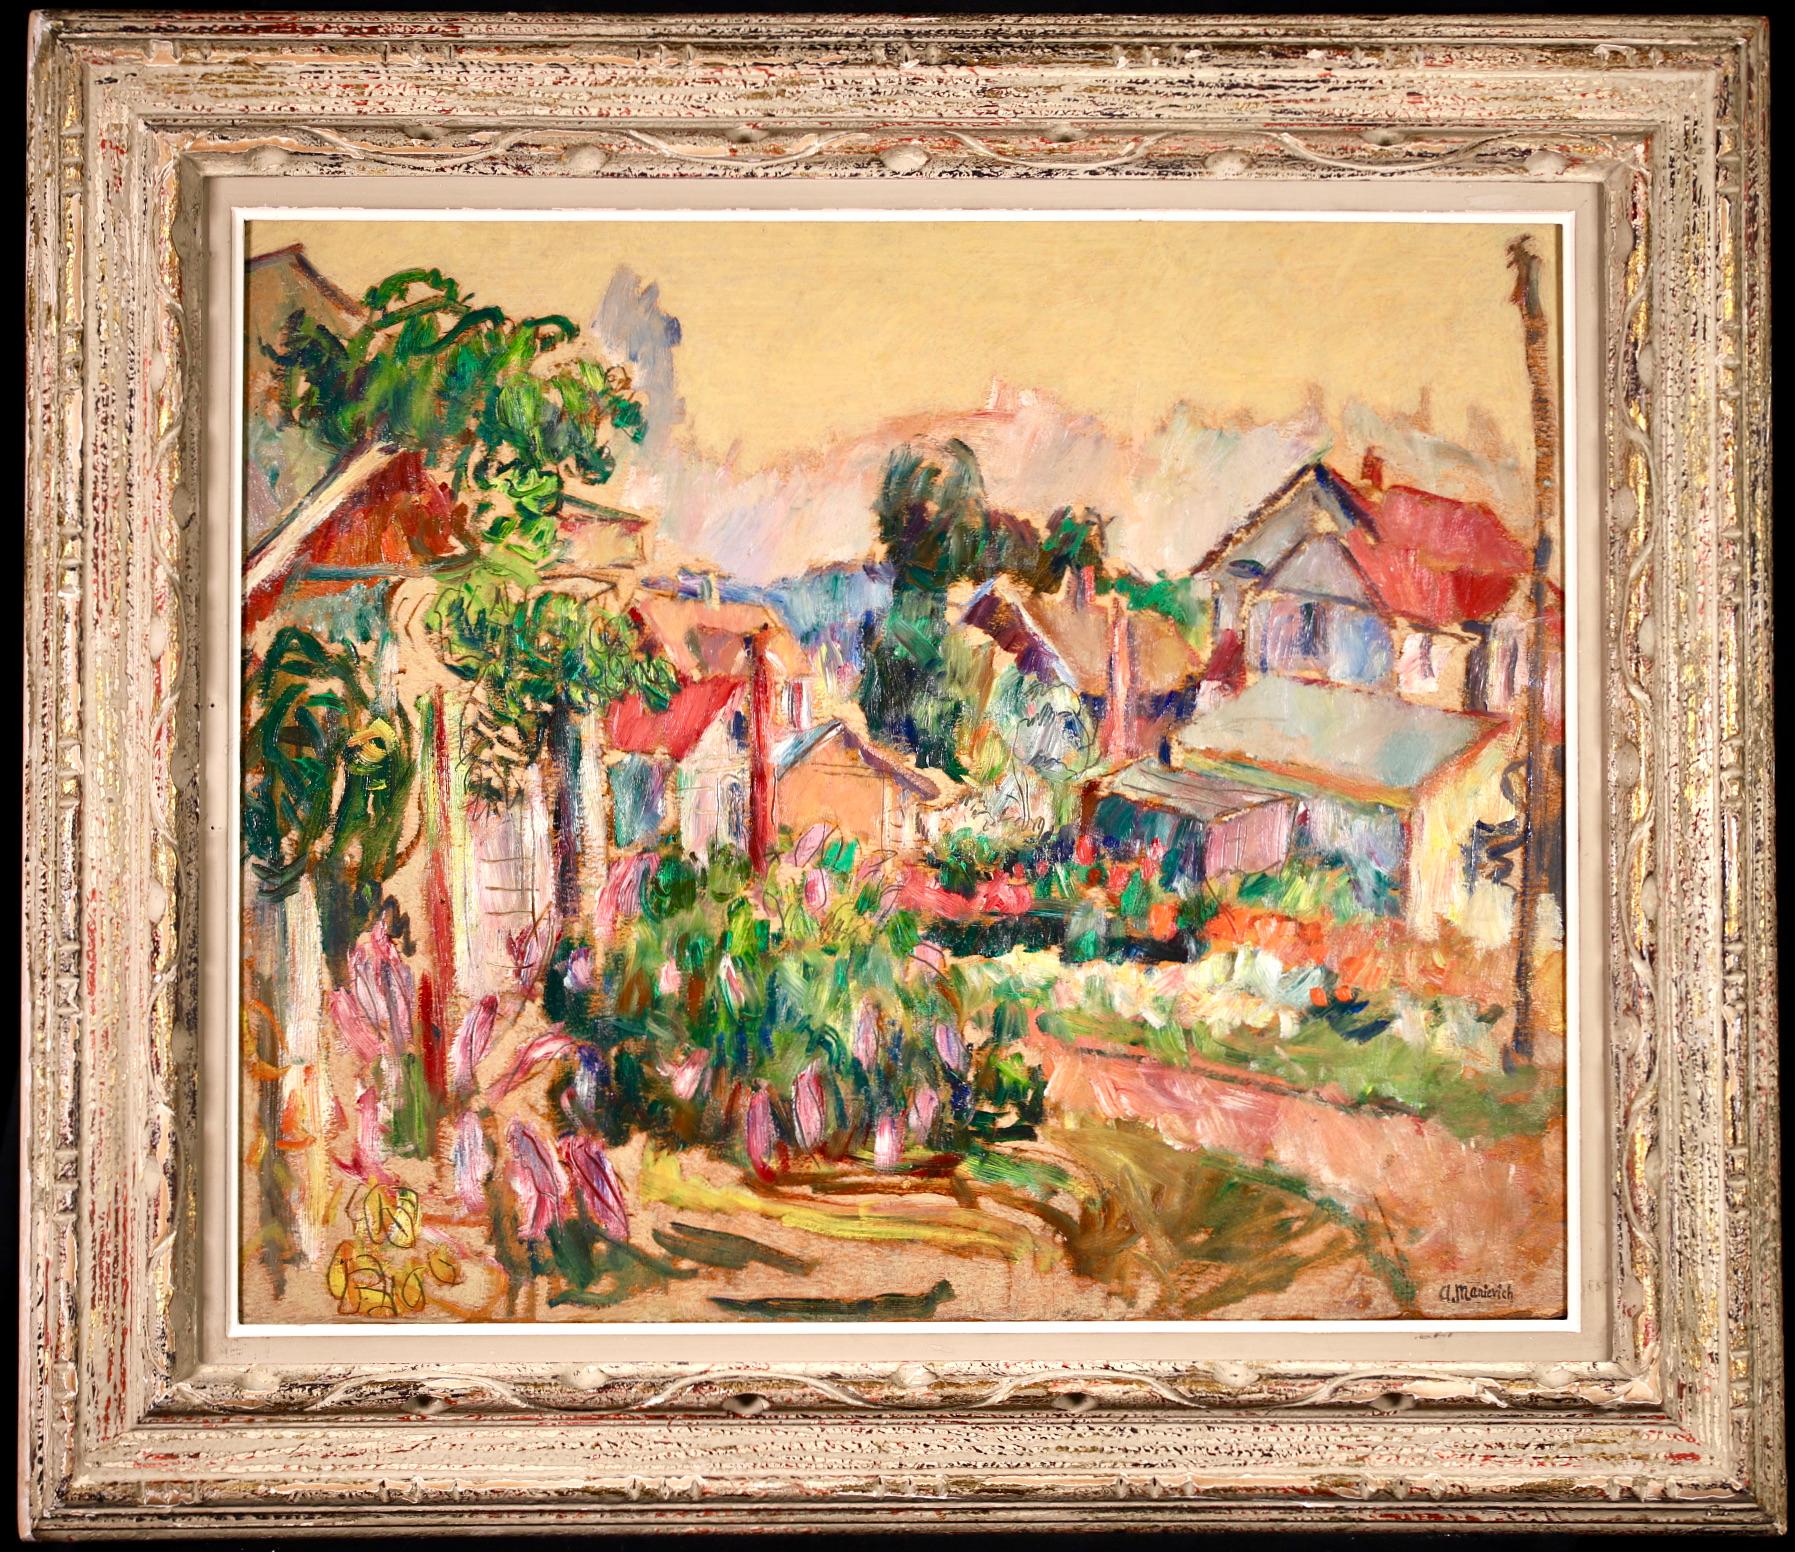 The Garden - 20th Century Oil, Cottages in Village Landscape by Abram Manevich - Painting by Abram Anshelevich Manevich